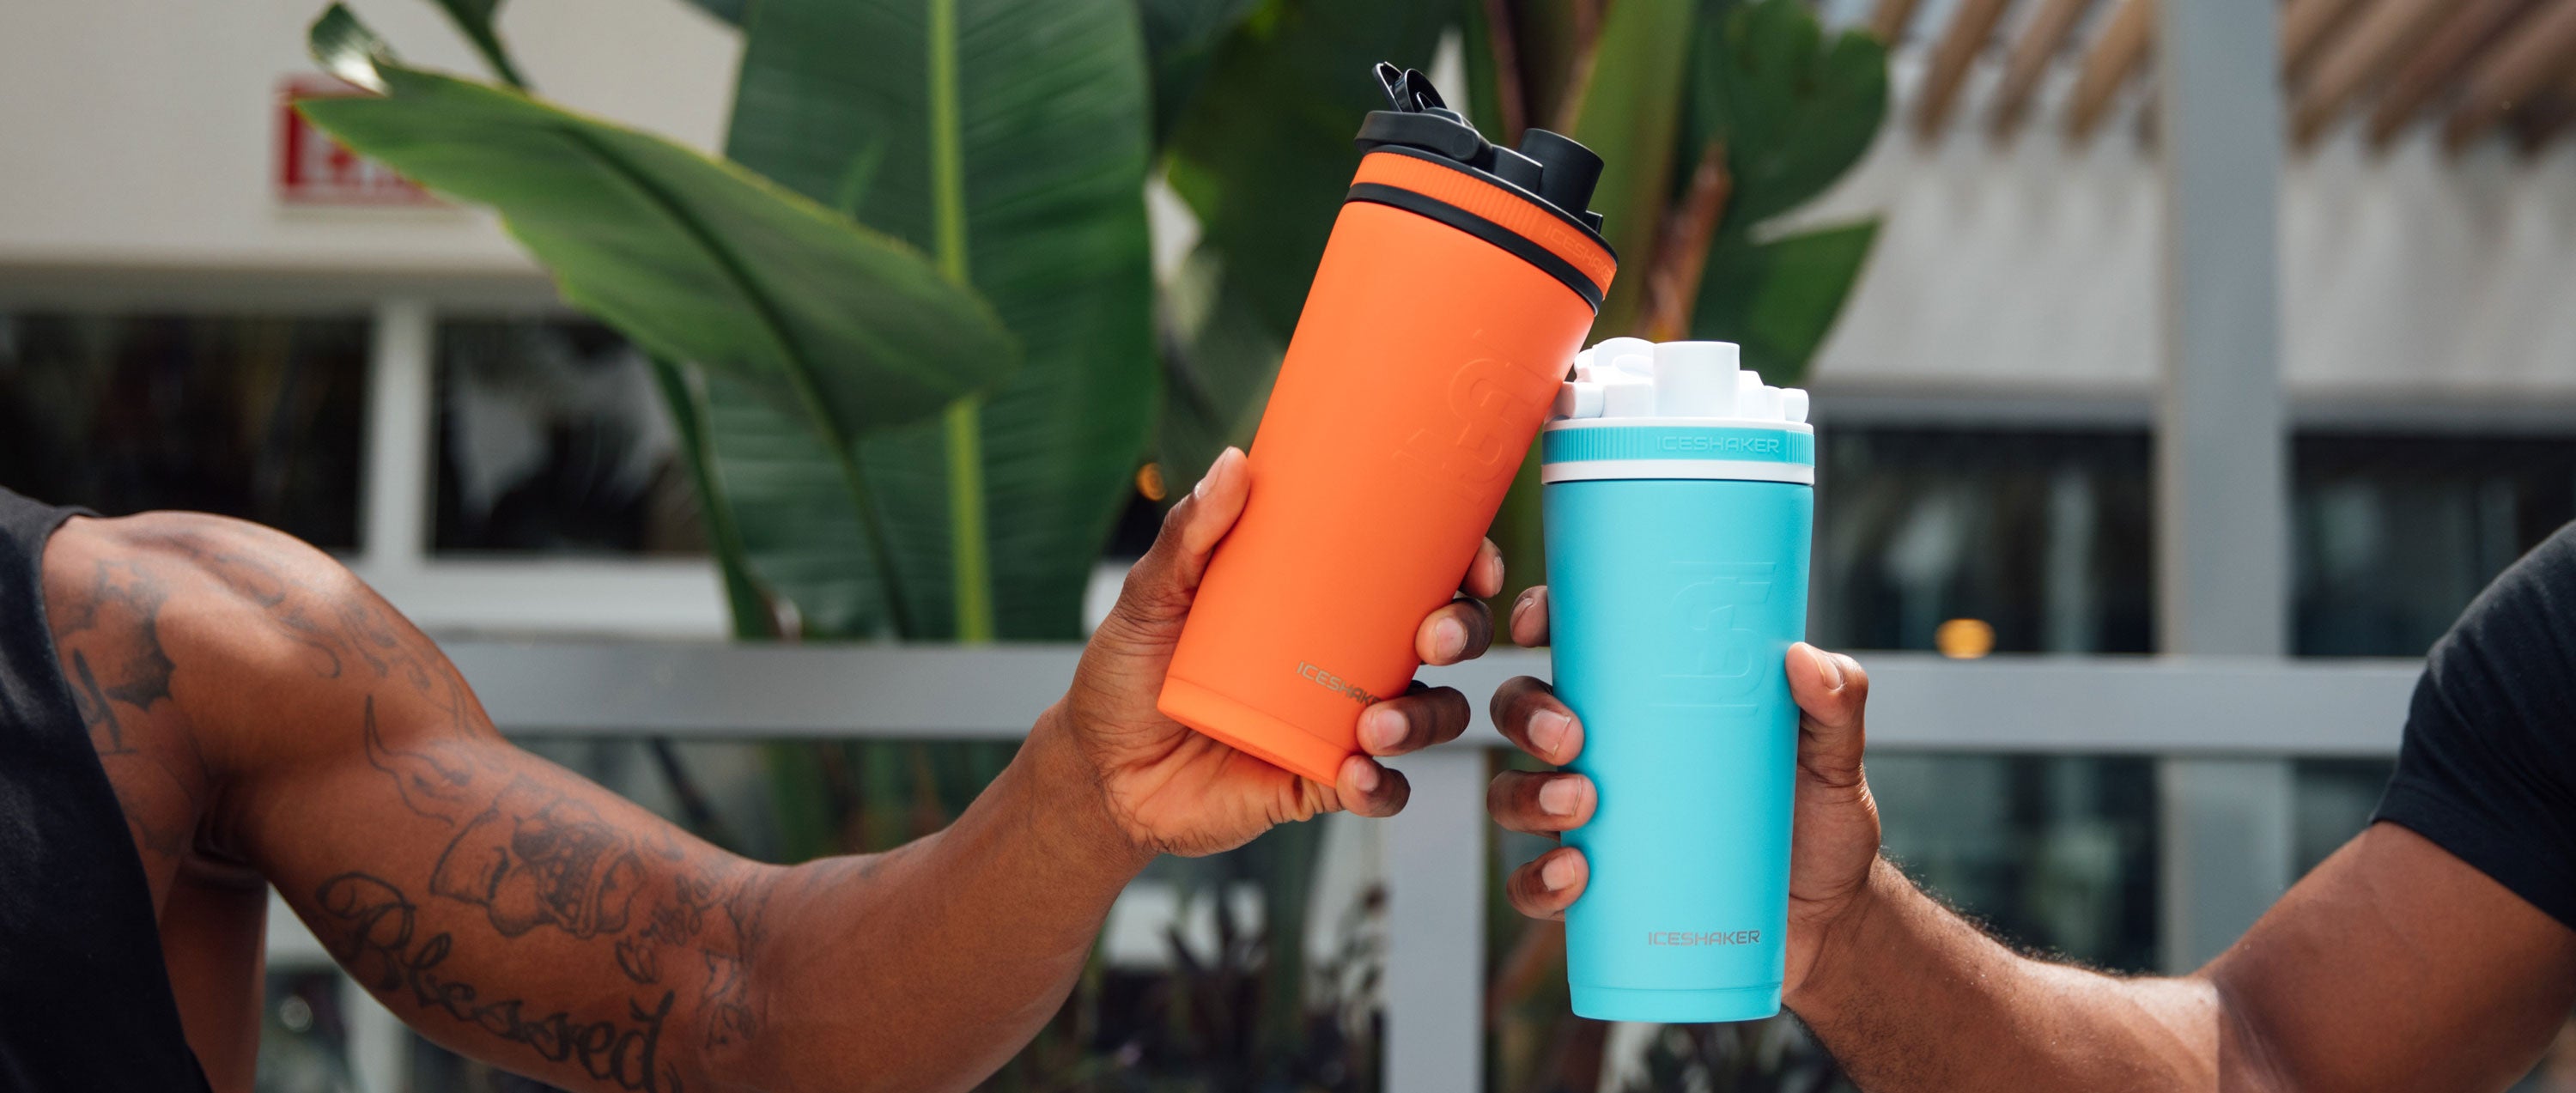 An image of the Orange 26oz Ice Shaker & Caribbean Blue 26oz Ice Shaker next to each other in an outdoor, summer setting